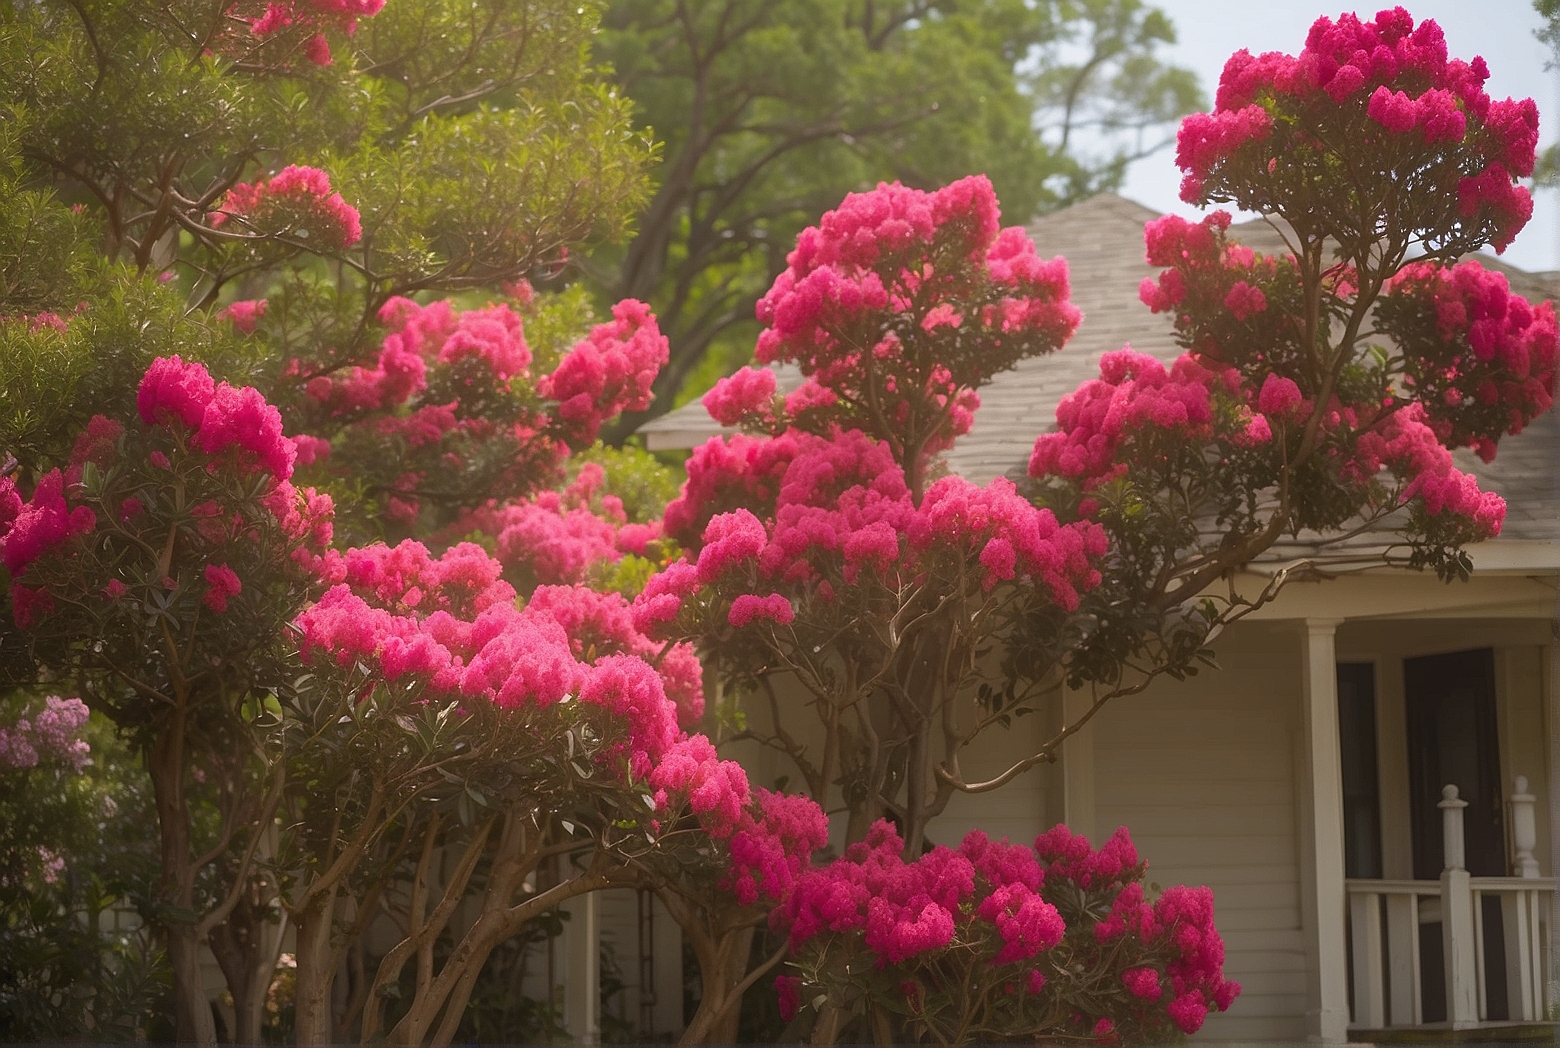 Can You Prune a Crepe Myrtle in the Summer?